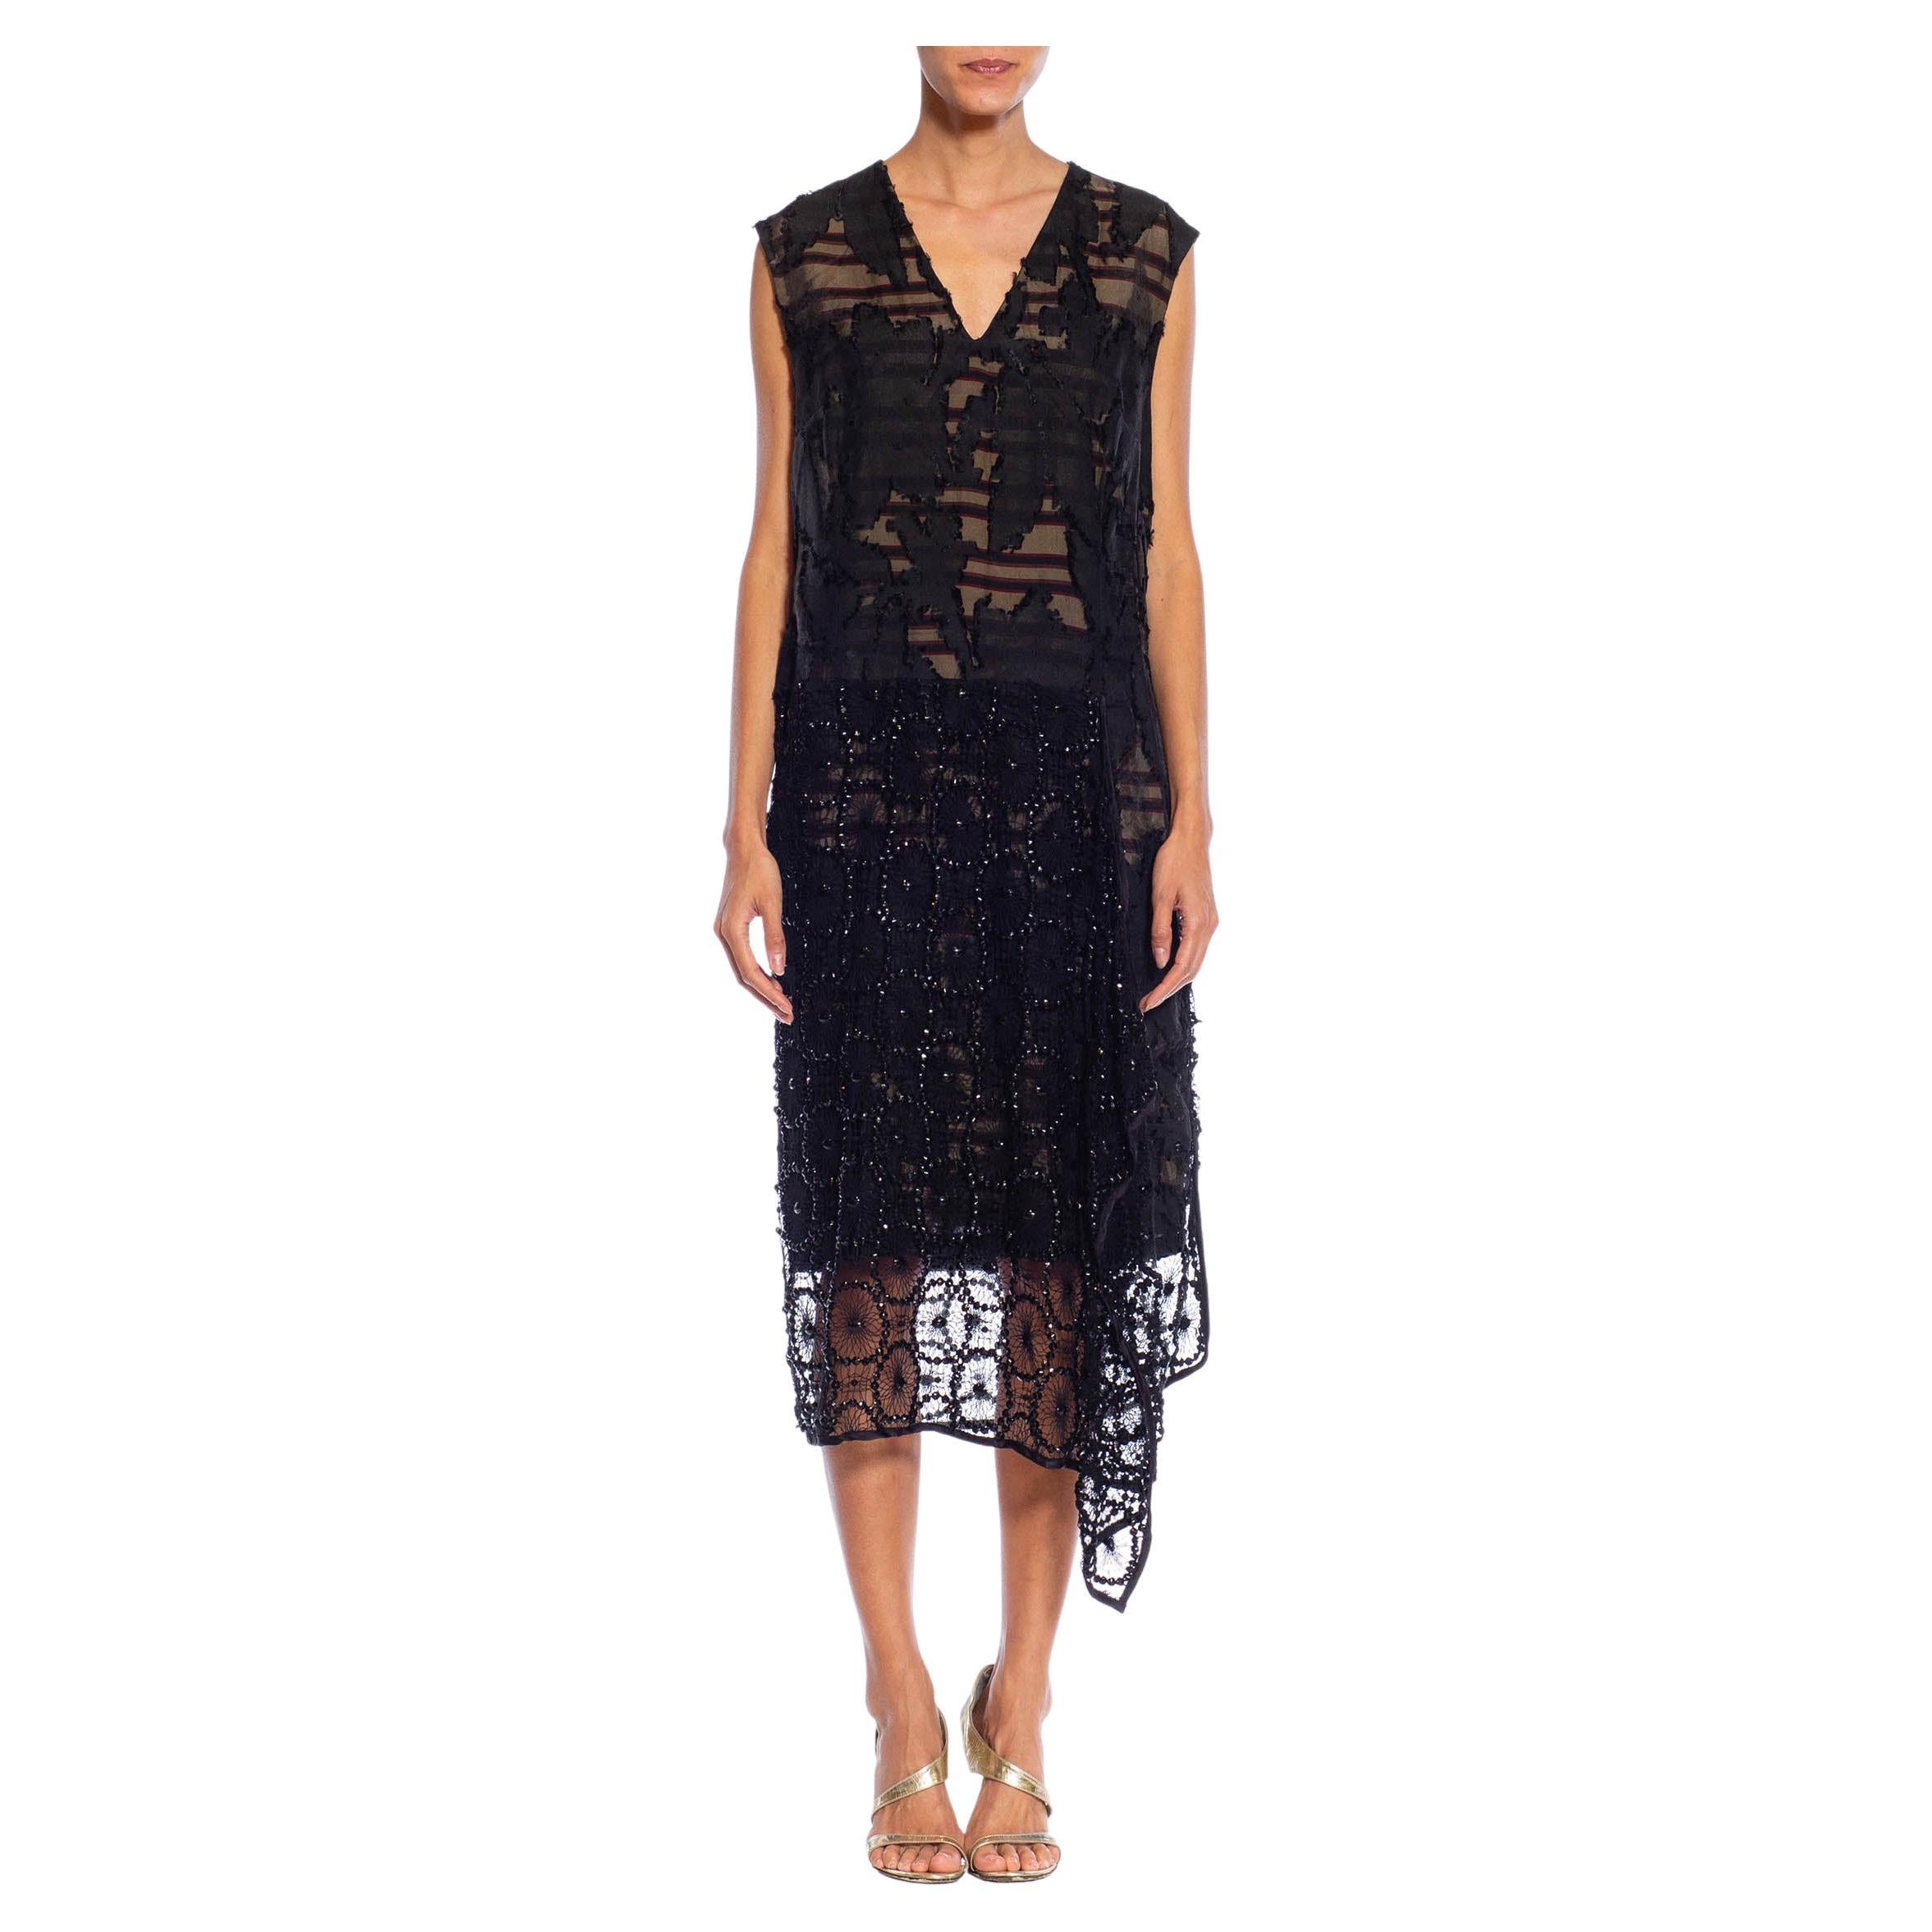 2000S DRIES VAN NOTEN Black Silk & Beaded Lace 20S Style Cocktail Dress For Sale